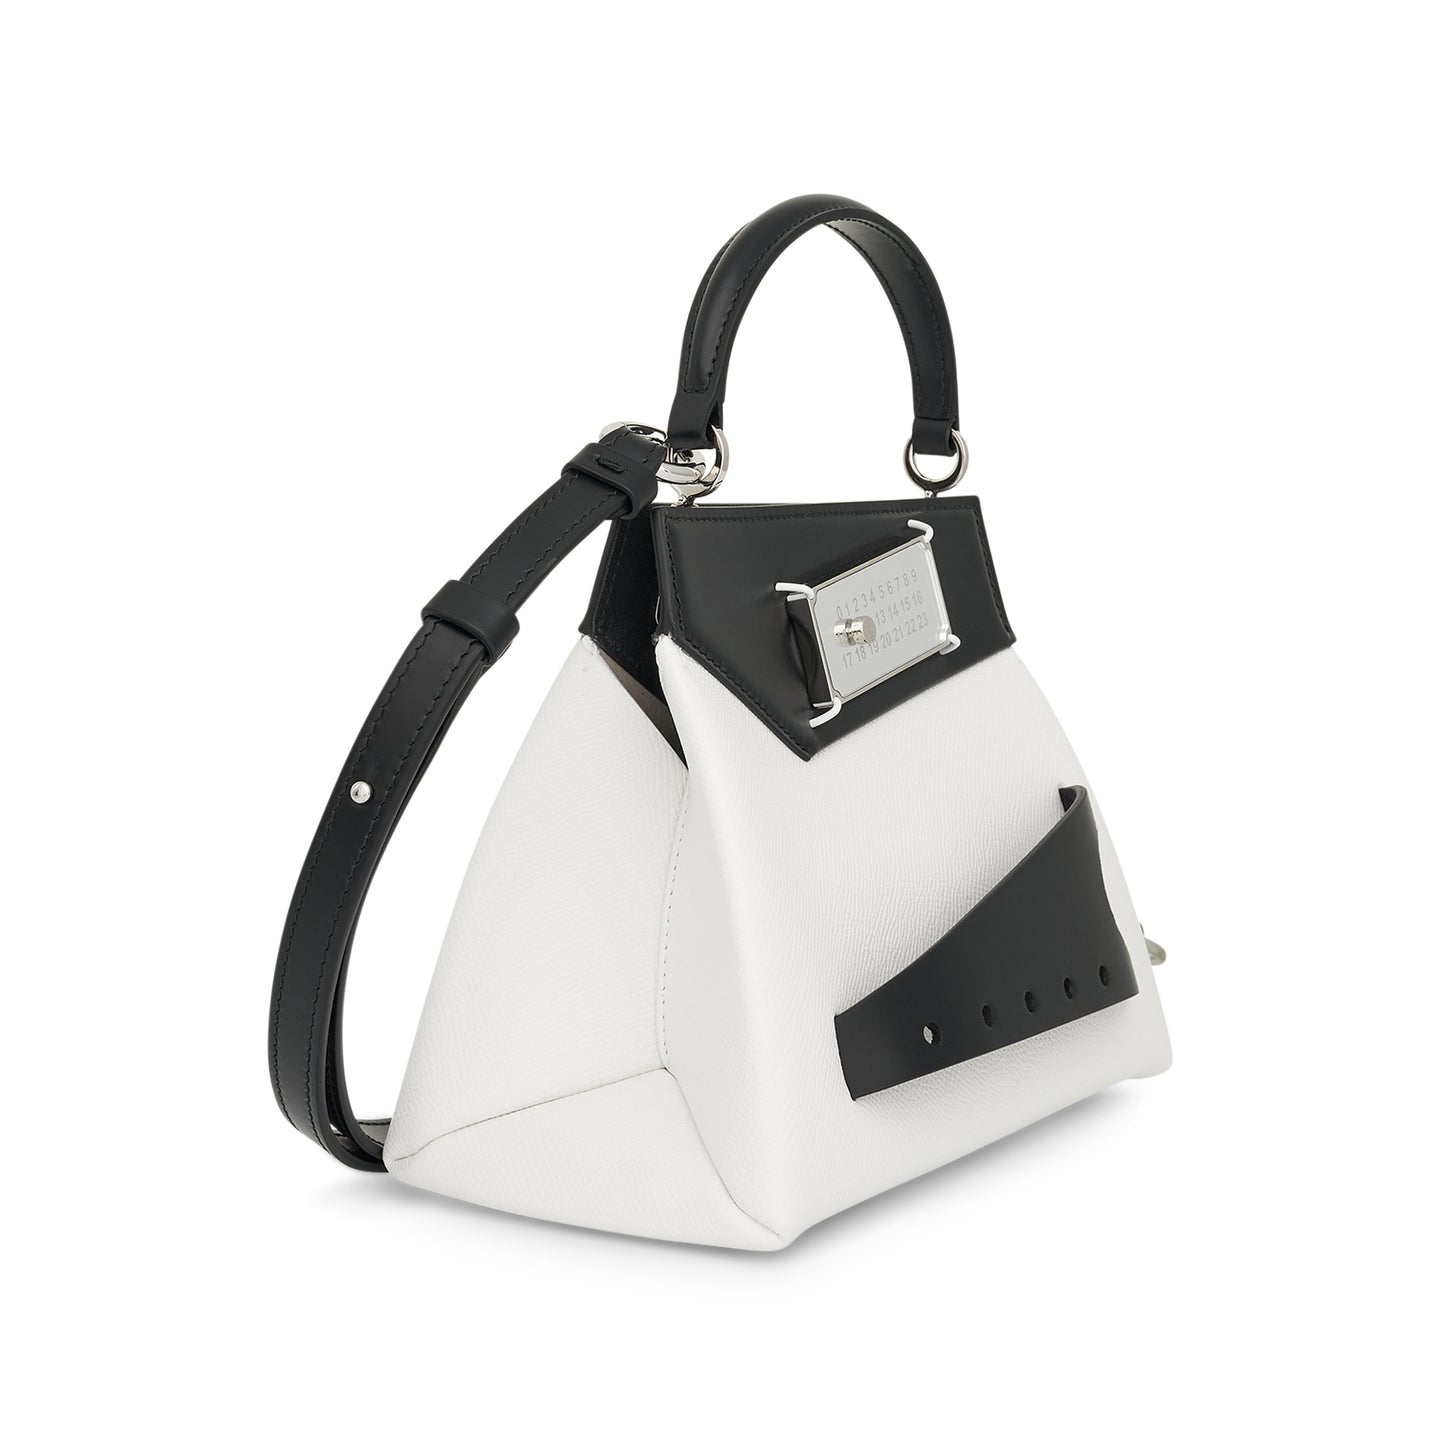 Small Snatched Handbag in Black/White